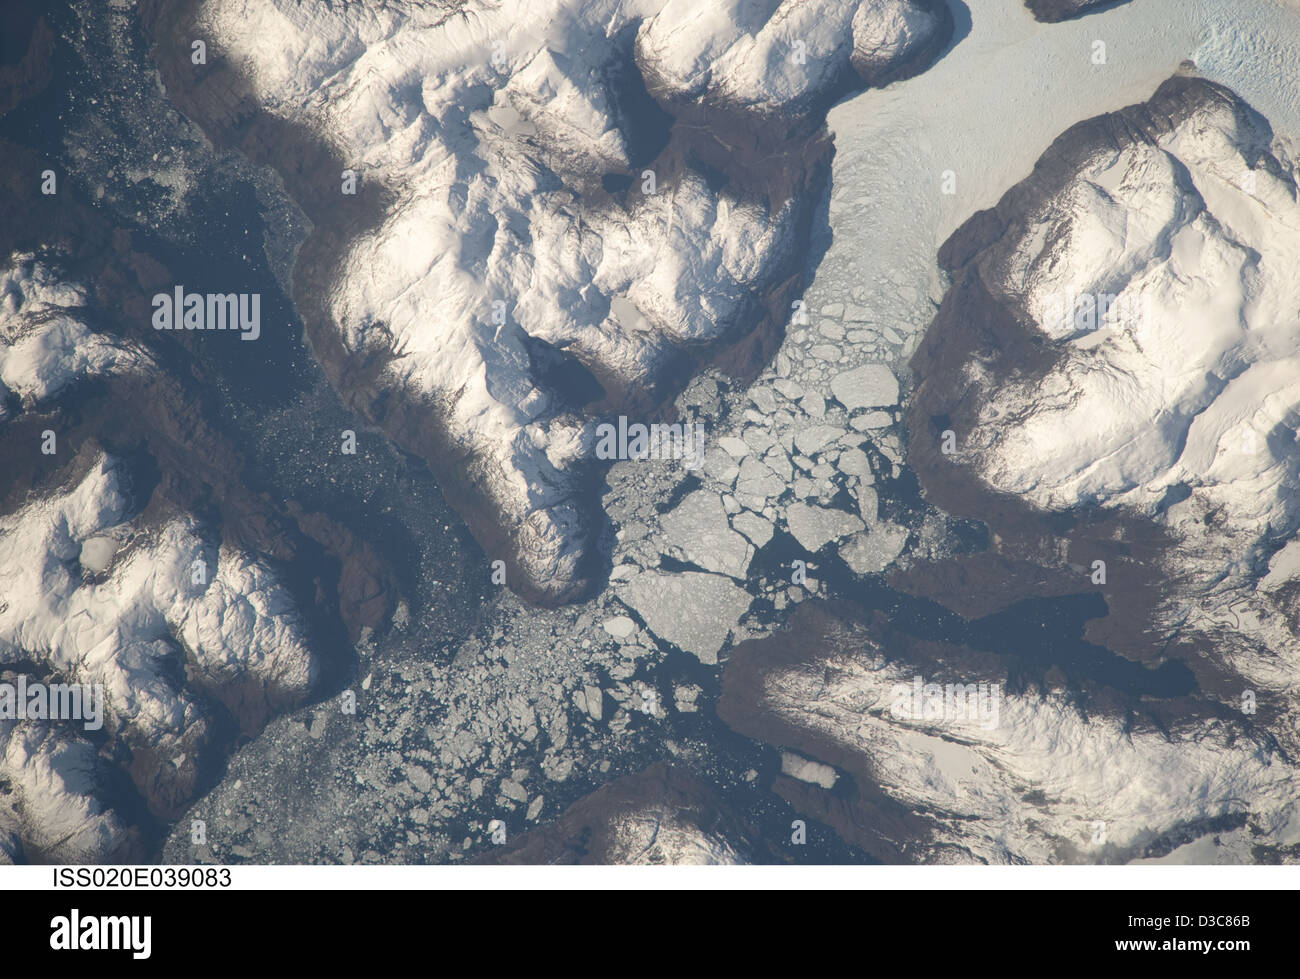 Southern Patagonian Ice Field, Chile (NASA, International Space Station Science, 09/06/09) Stock Photo